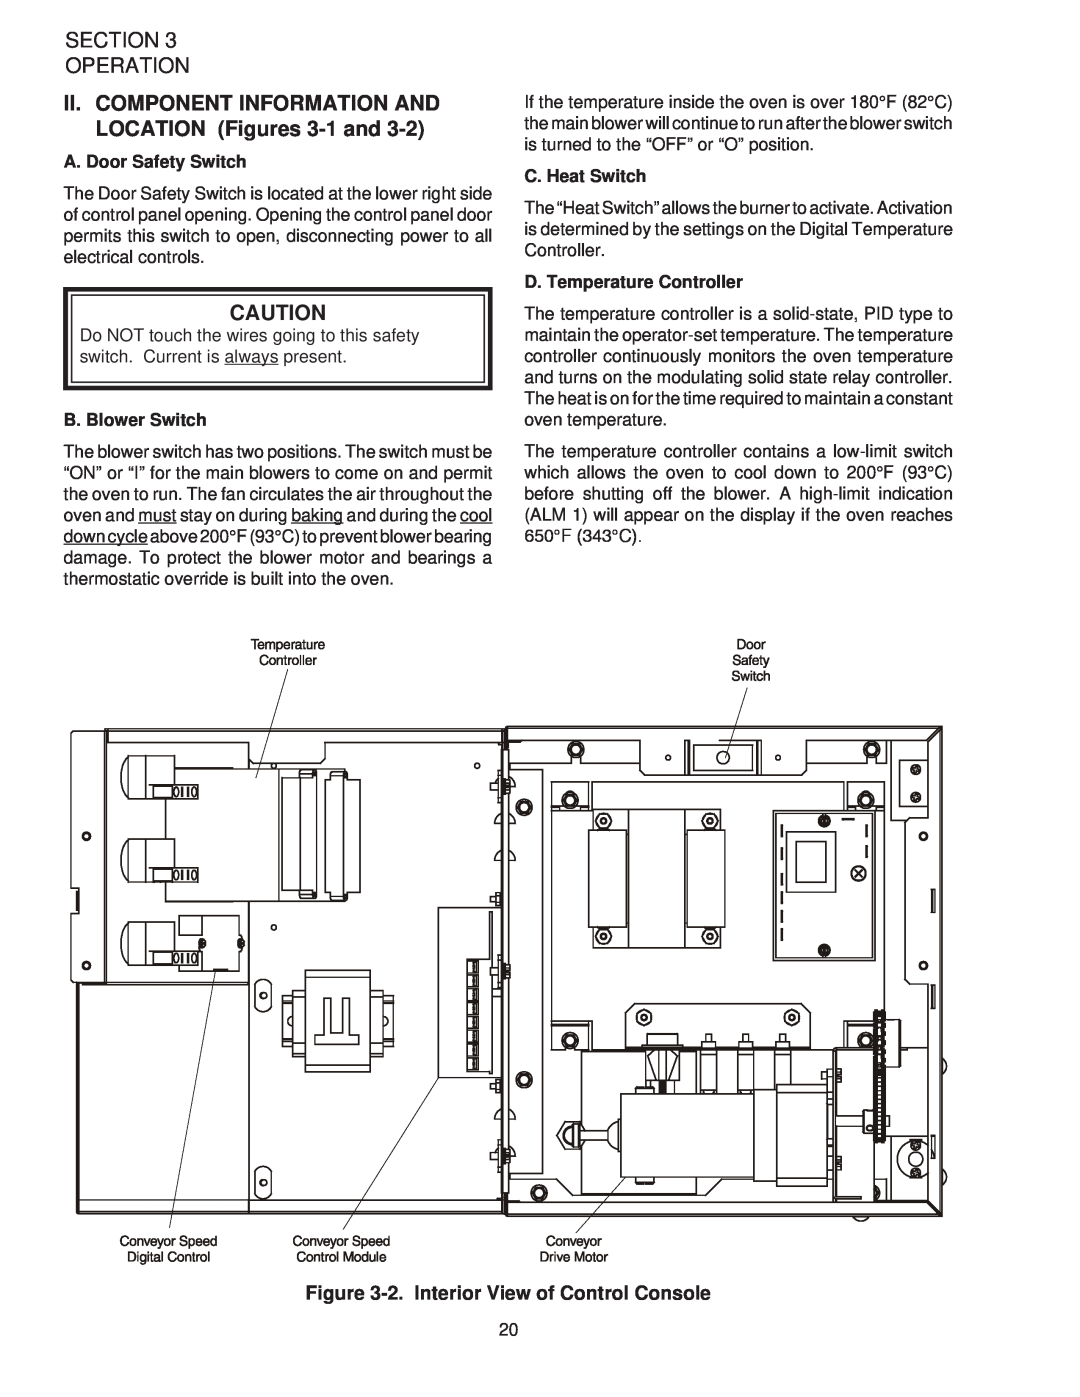 Middleby Marshall PS528G II. COMPONENT INFORMATION AND LOCATION Figures 3-1 and, Section Operation, A. Door Safety Switch 